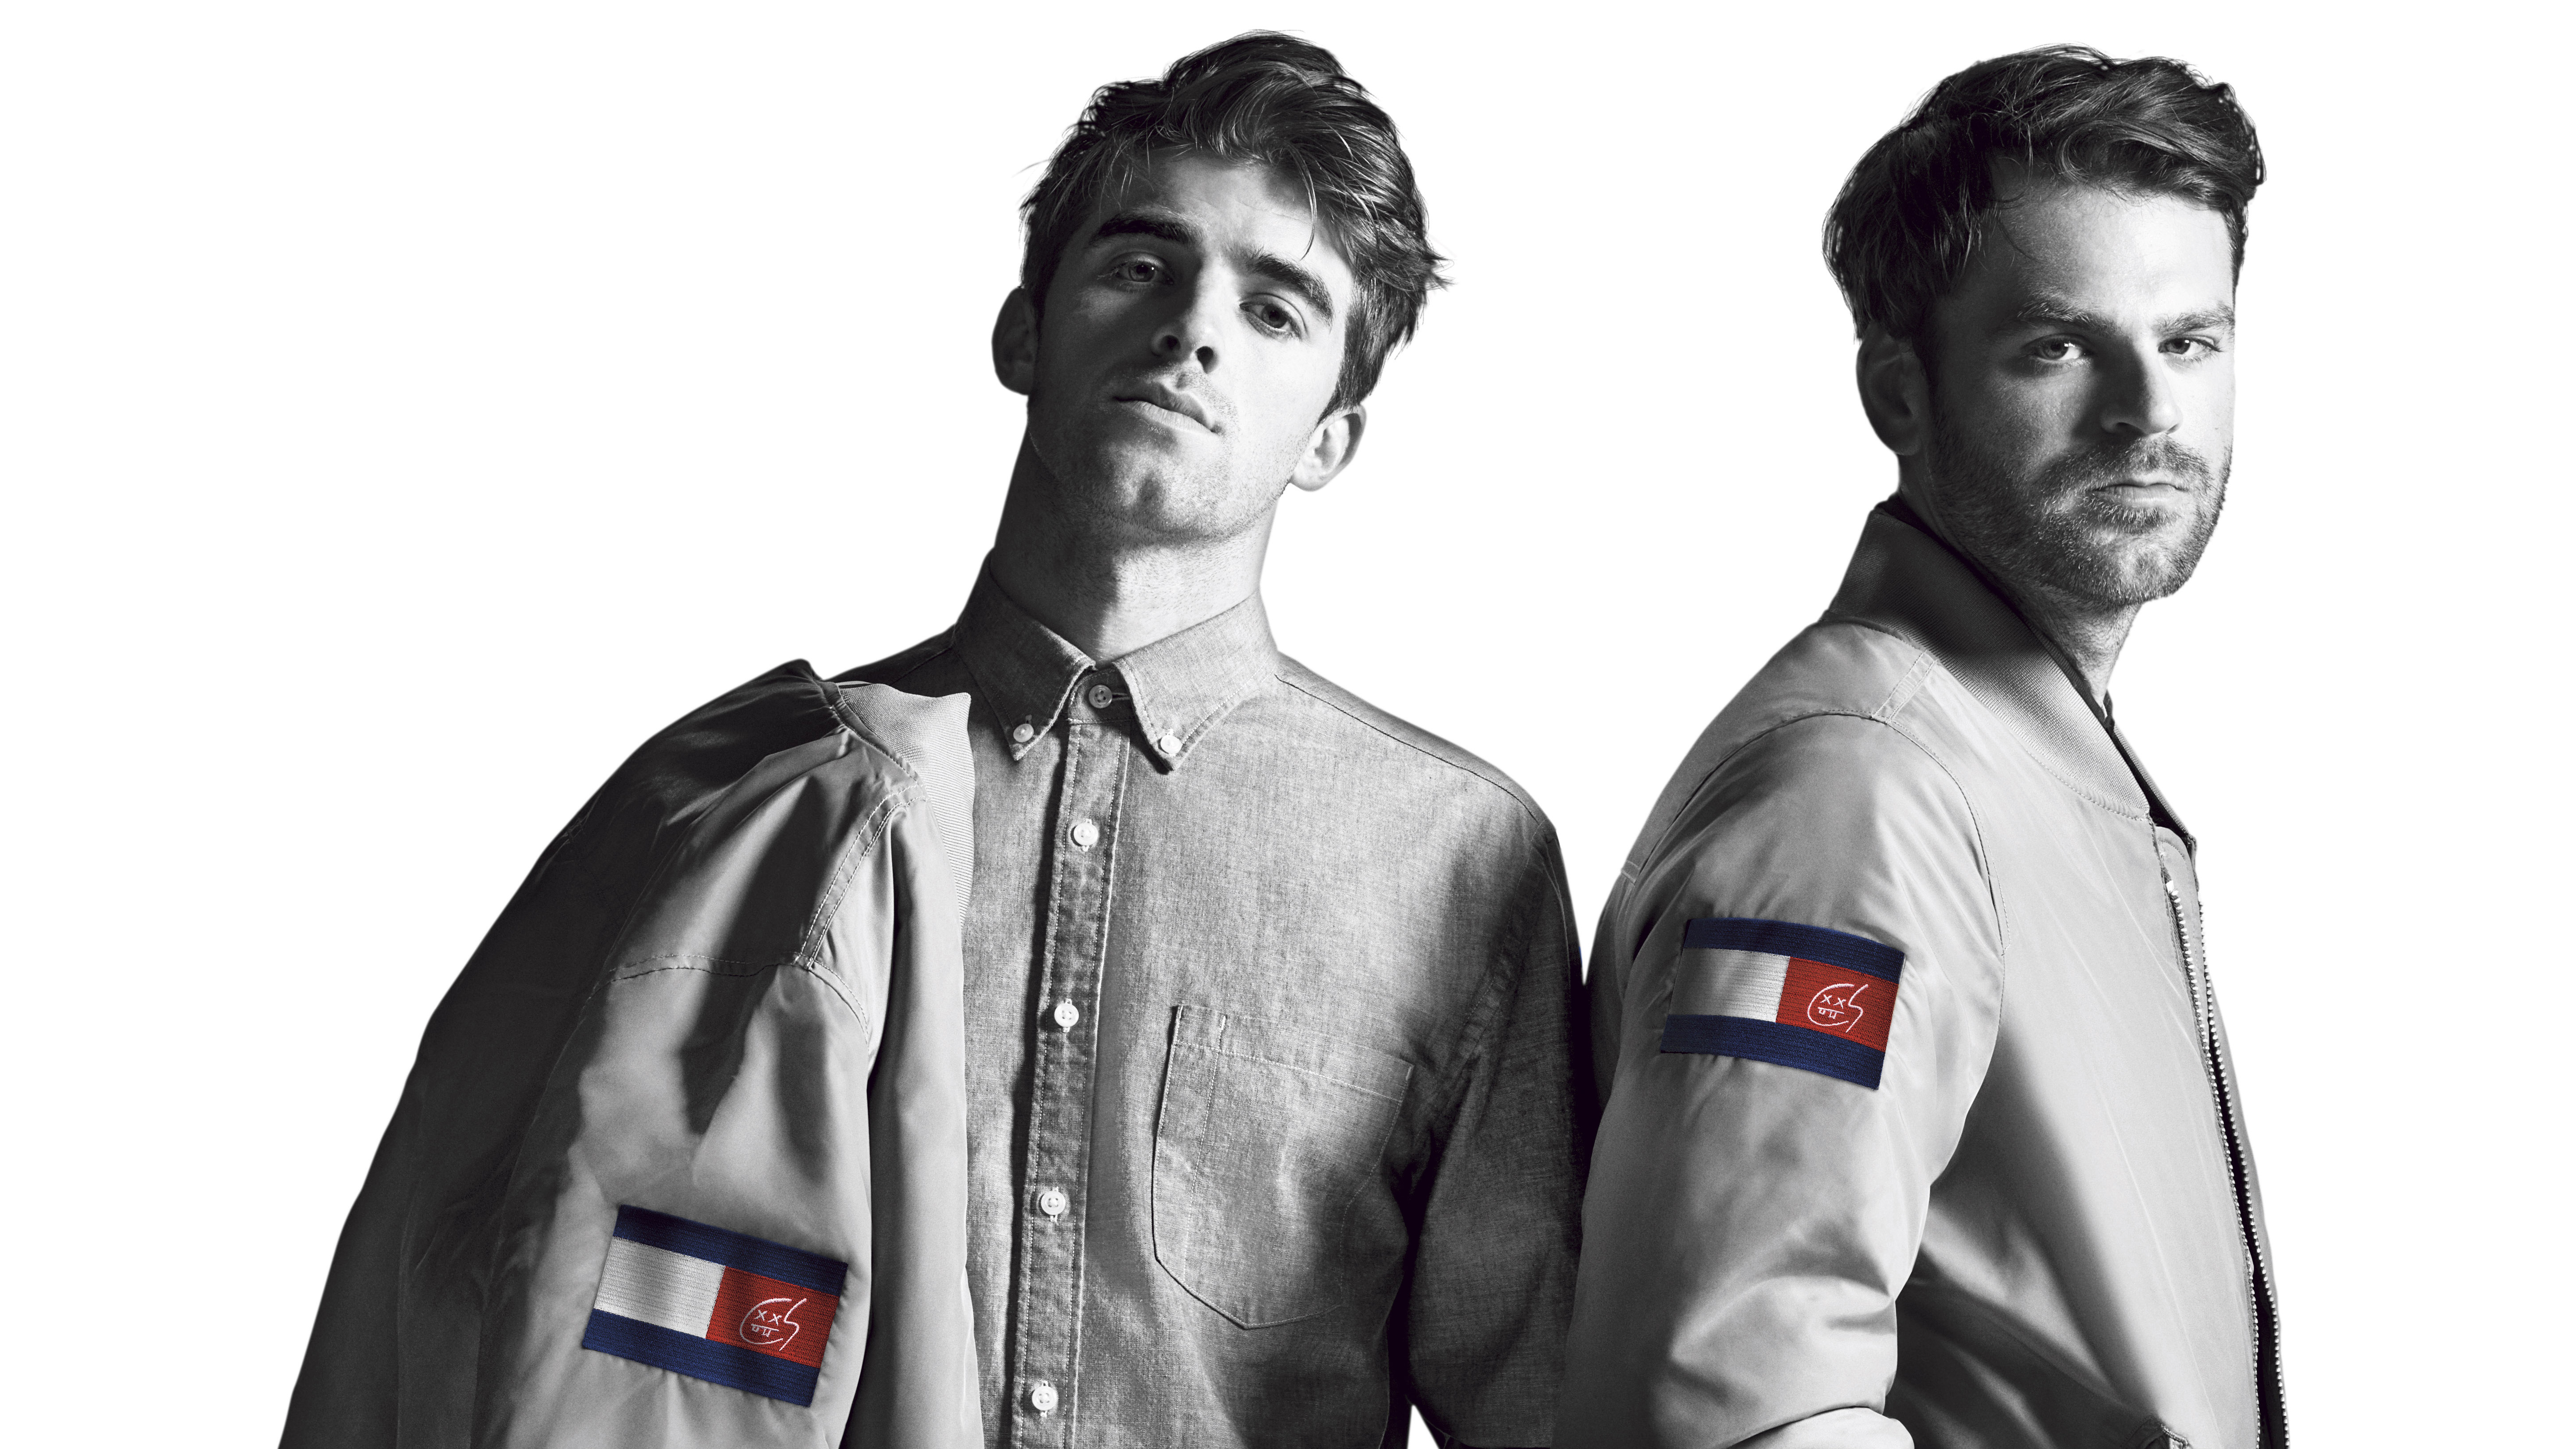 https://images.hdqwalls.com/wallpapers/andrew-taggart-and-alex-pall-in-tommy-hilfiger-kr.jpg